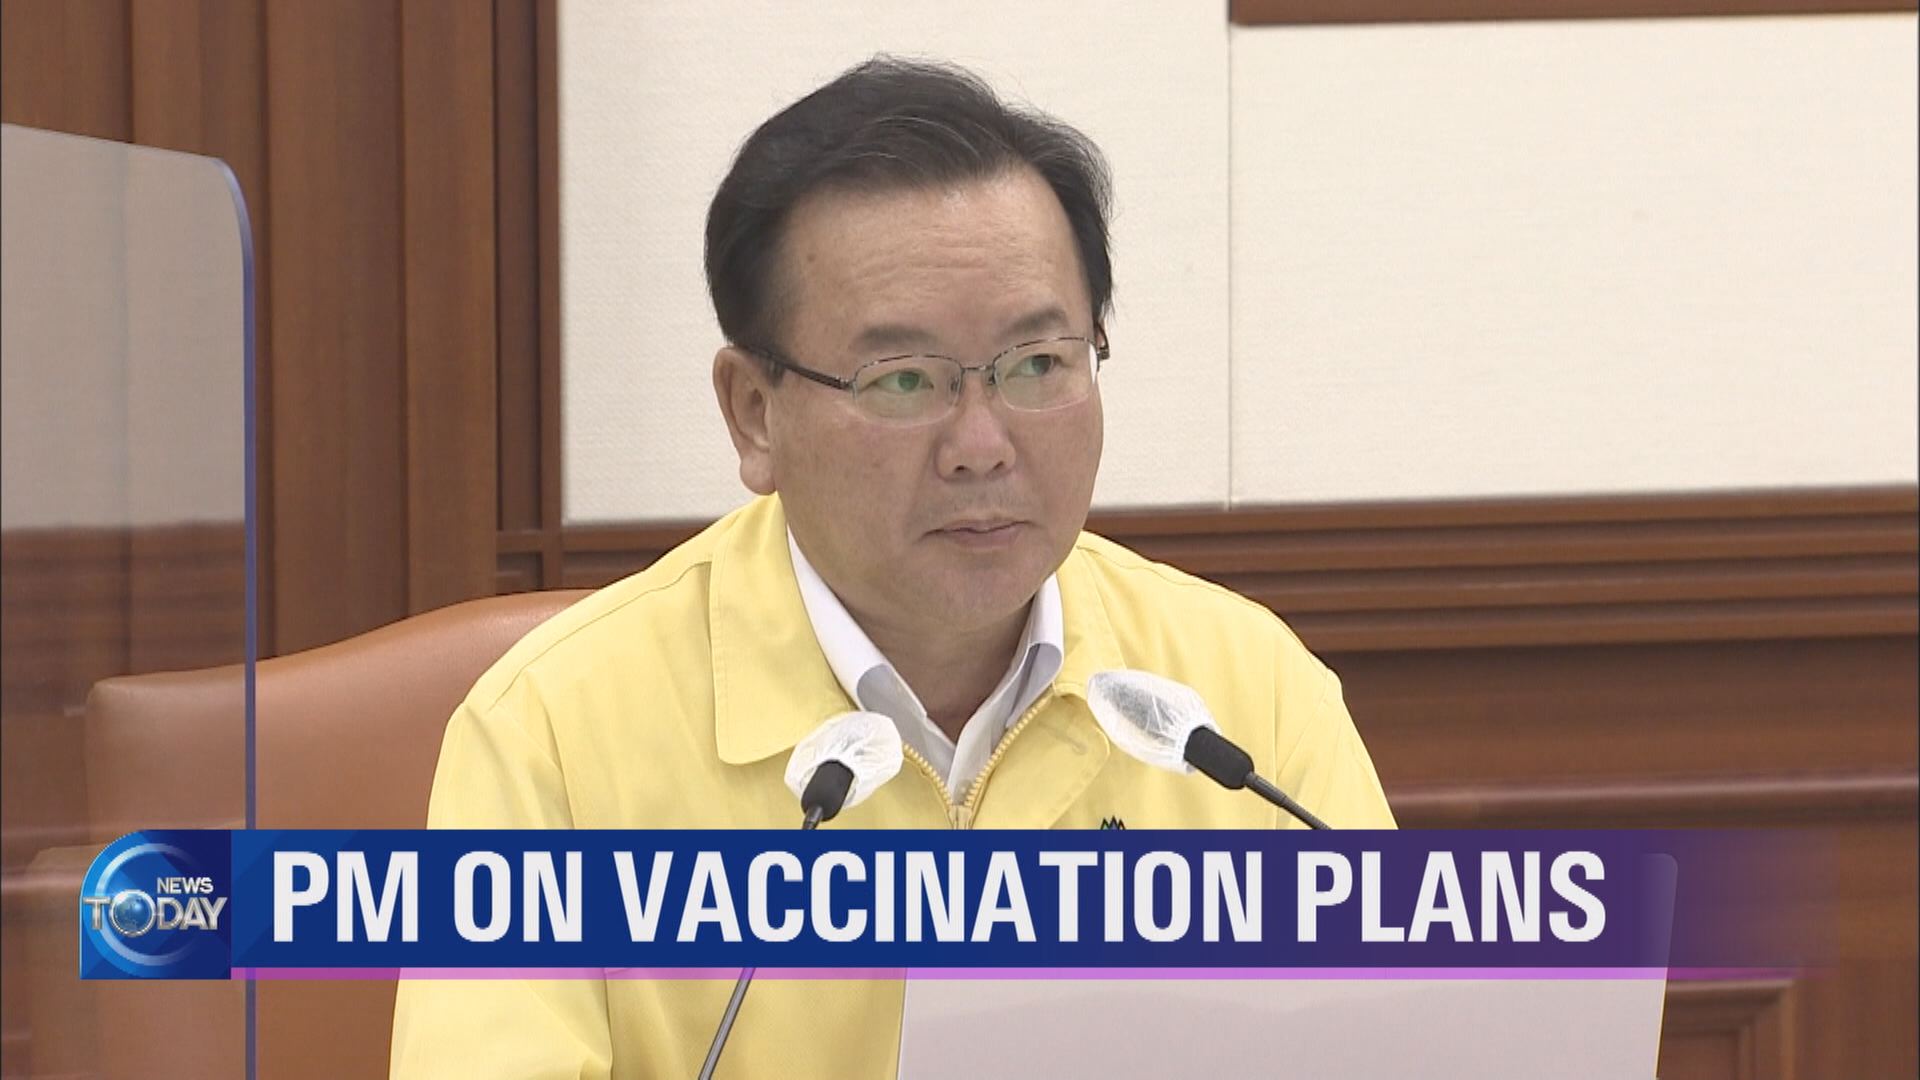 PM ON VACCINATION PLANS